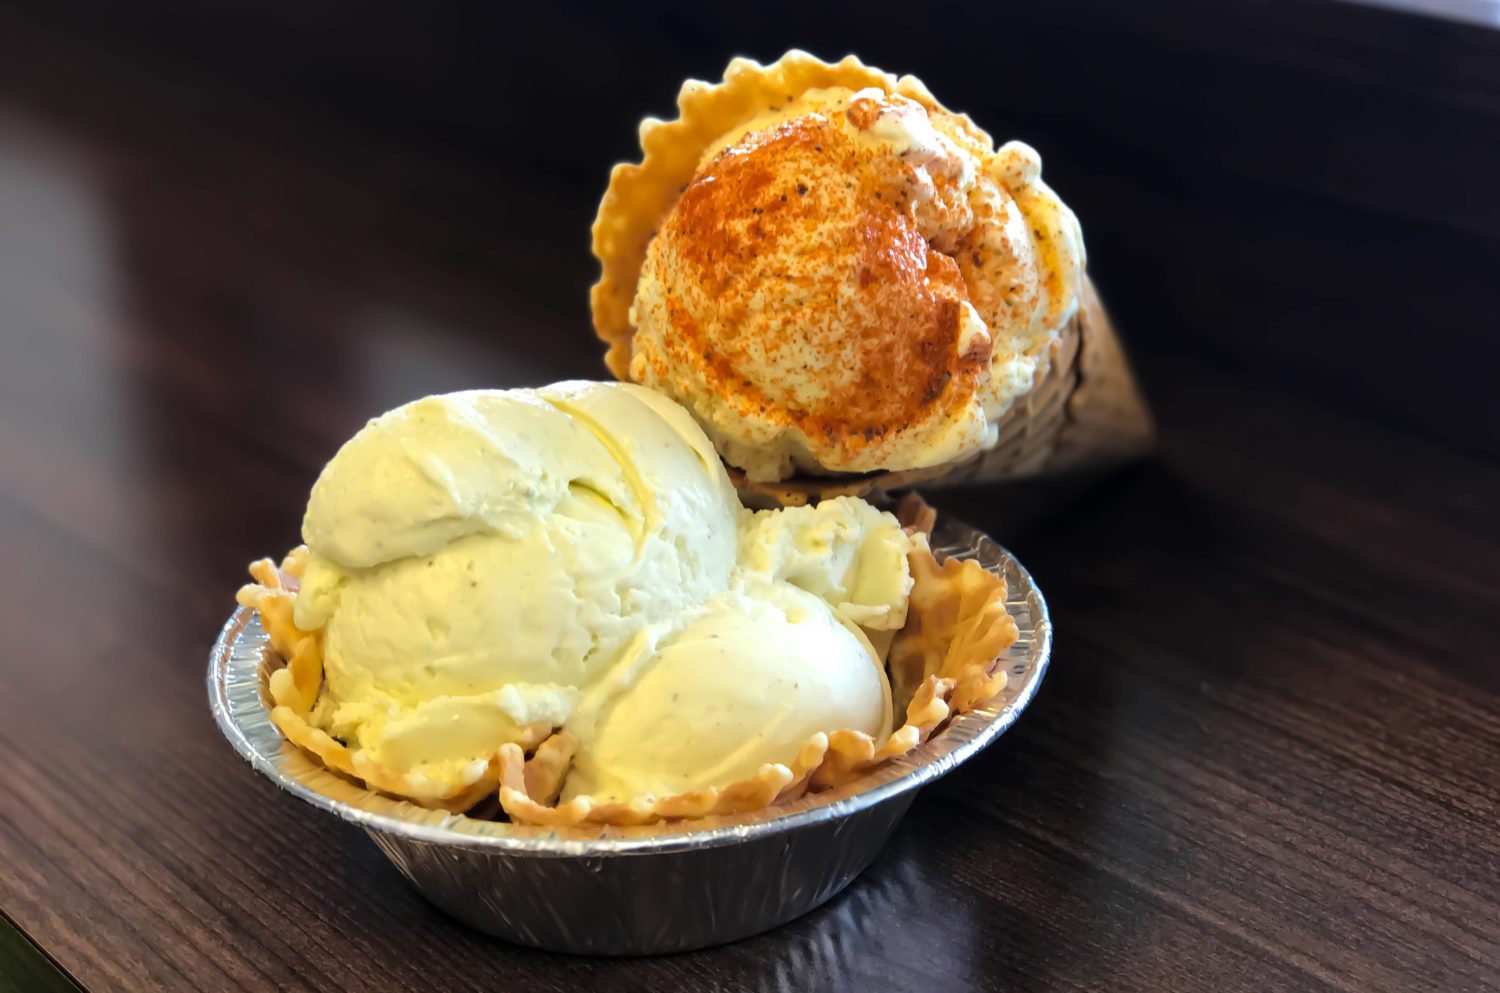 a nice cream cone topped with cinnamon and a waffle cone bowl of vanilla ice cream